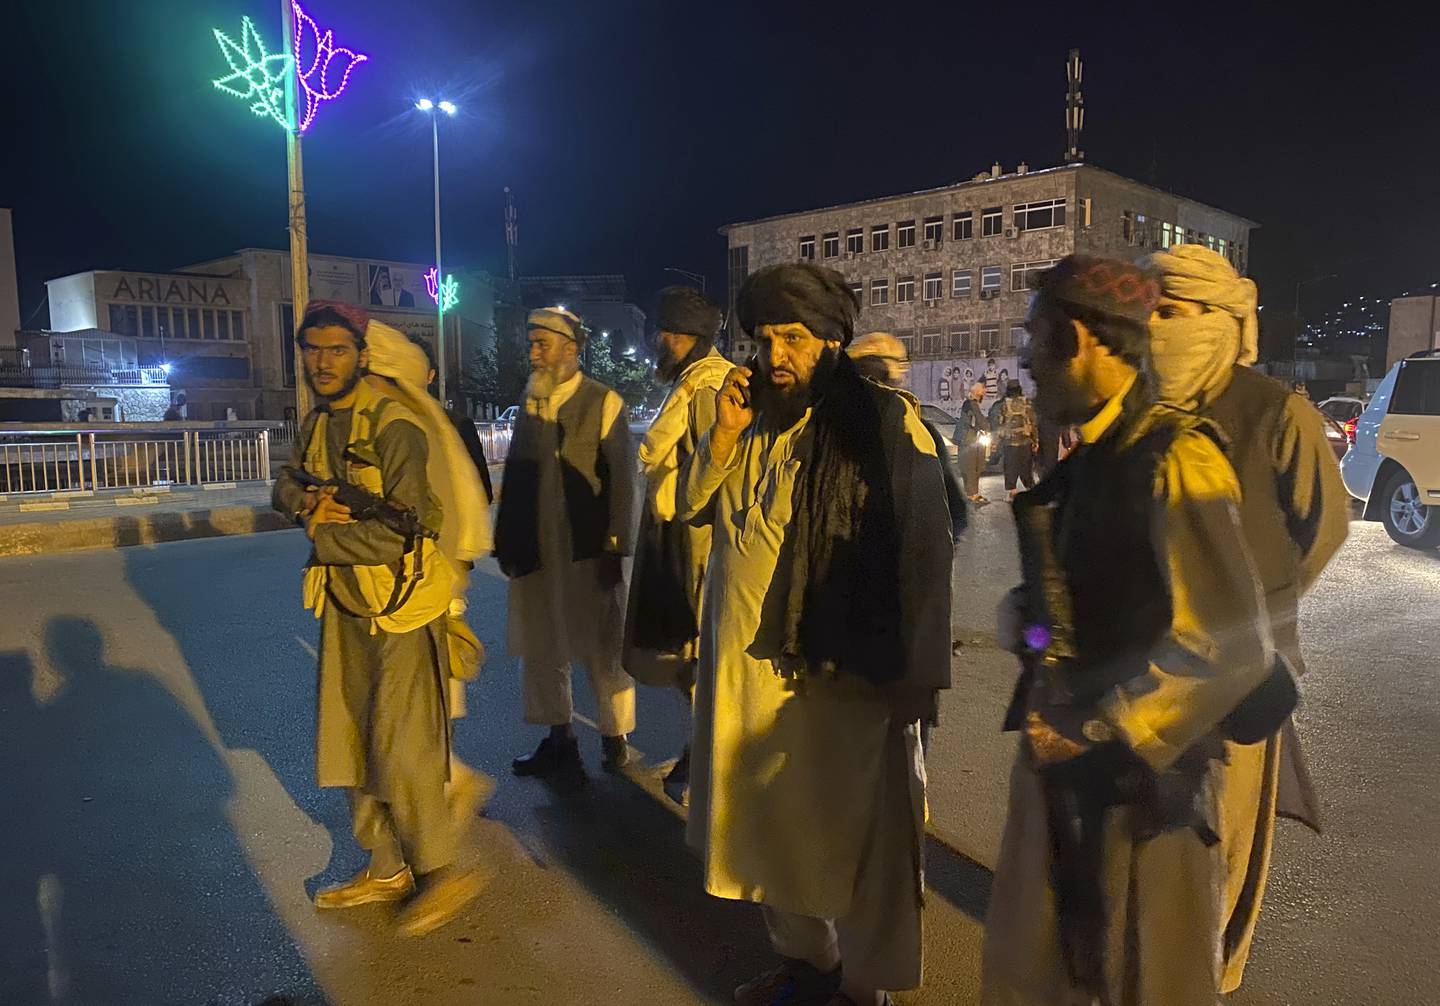 Taliban fighters have take control of Kabul after President Ashraf Ghani fled the country. AP